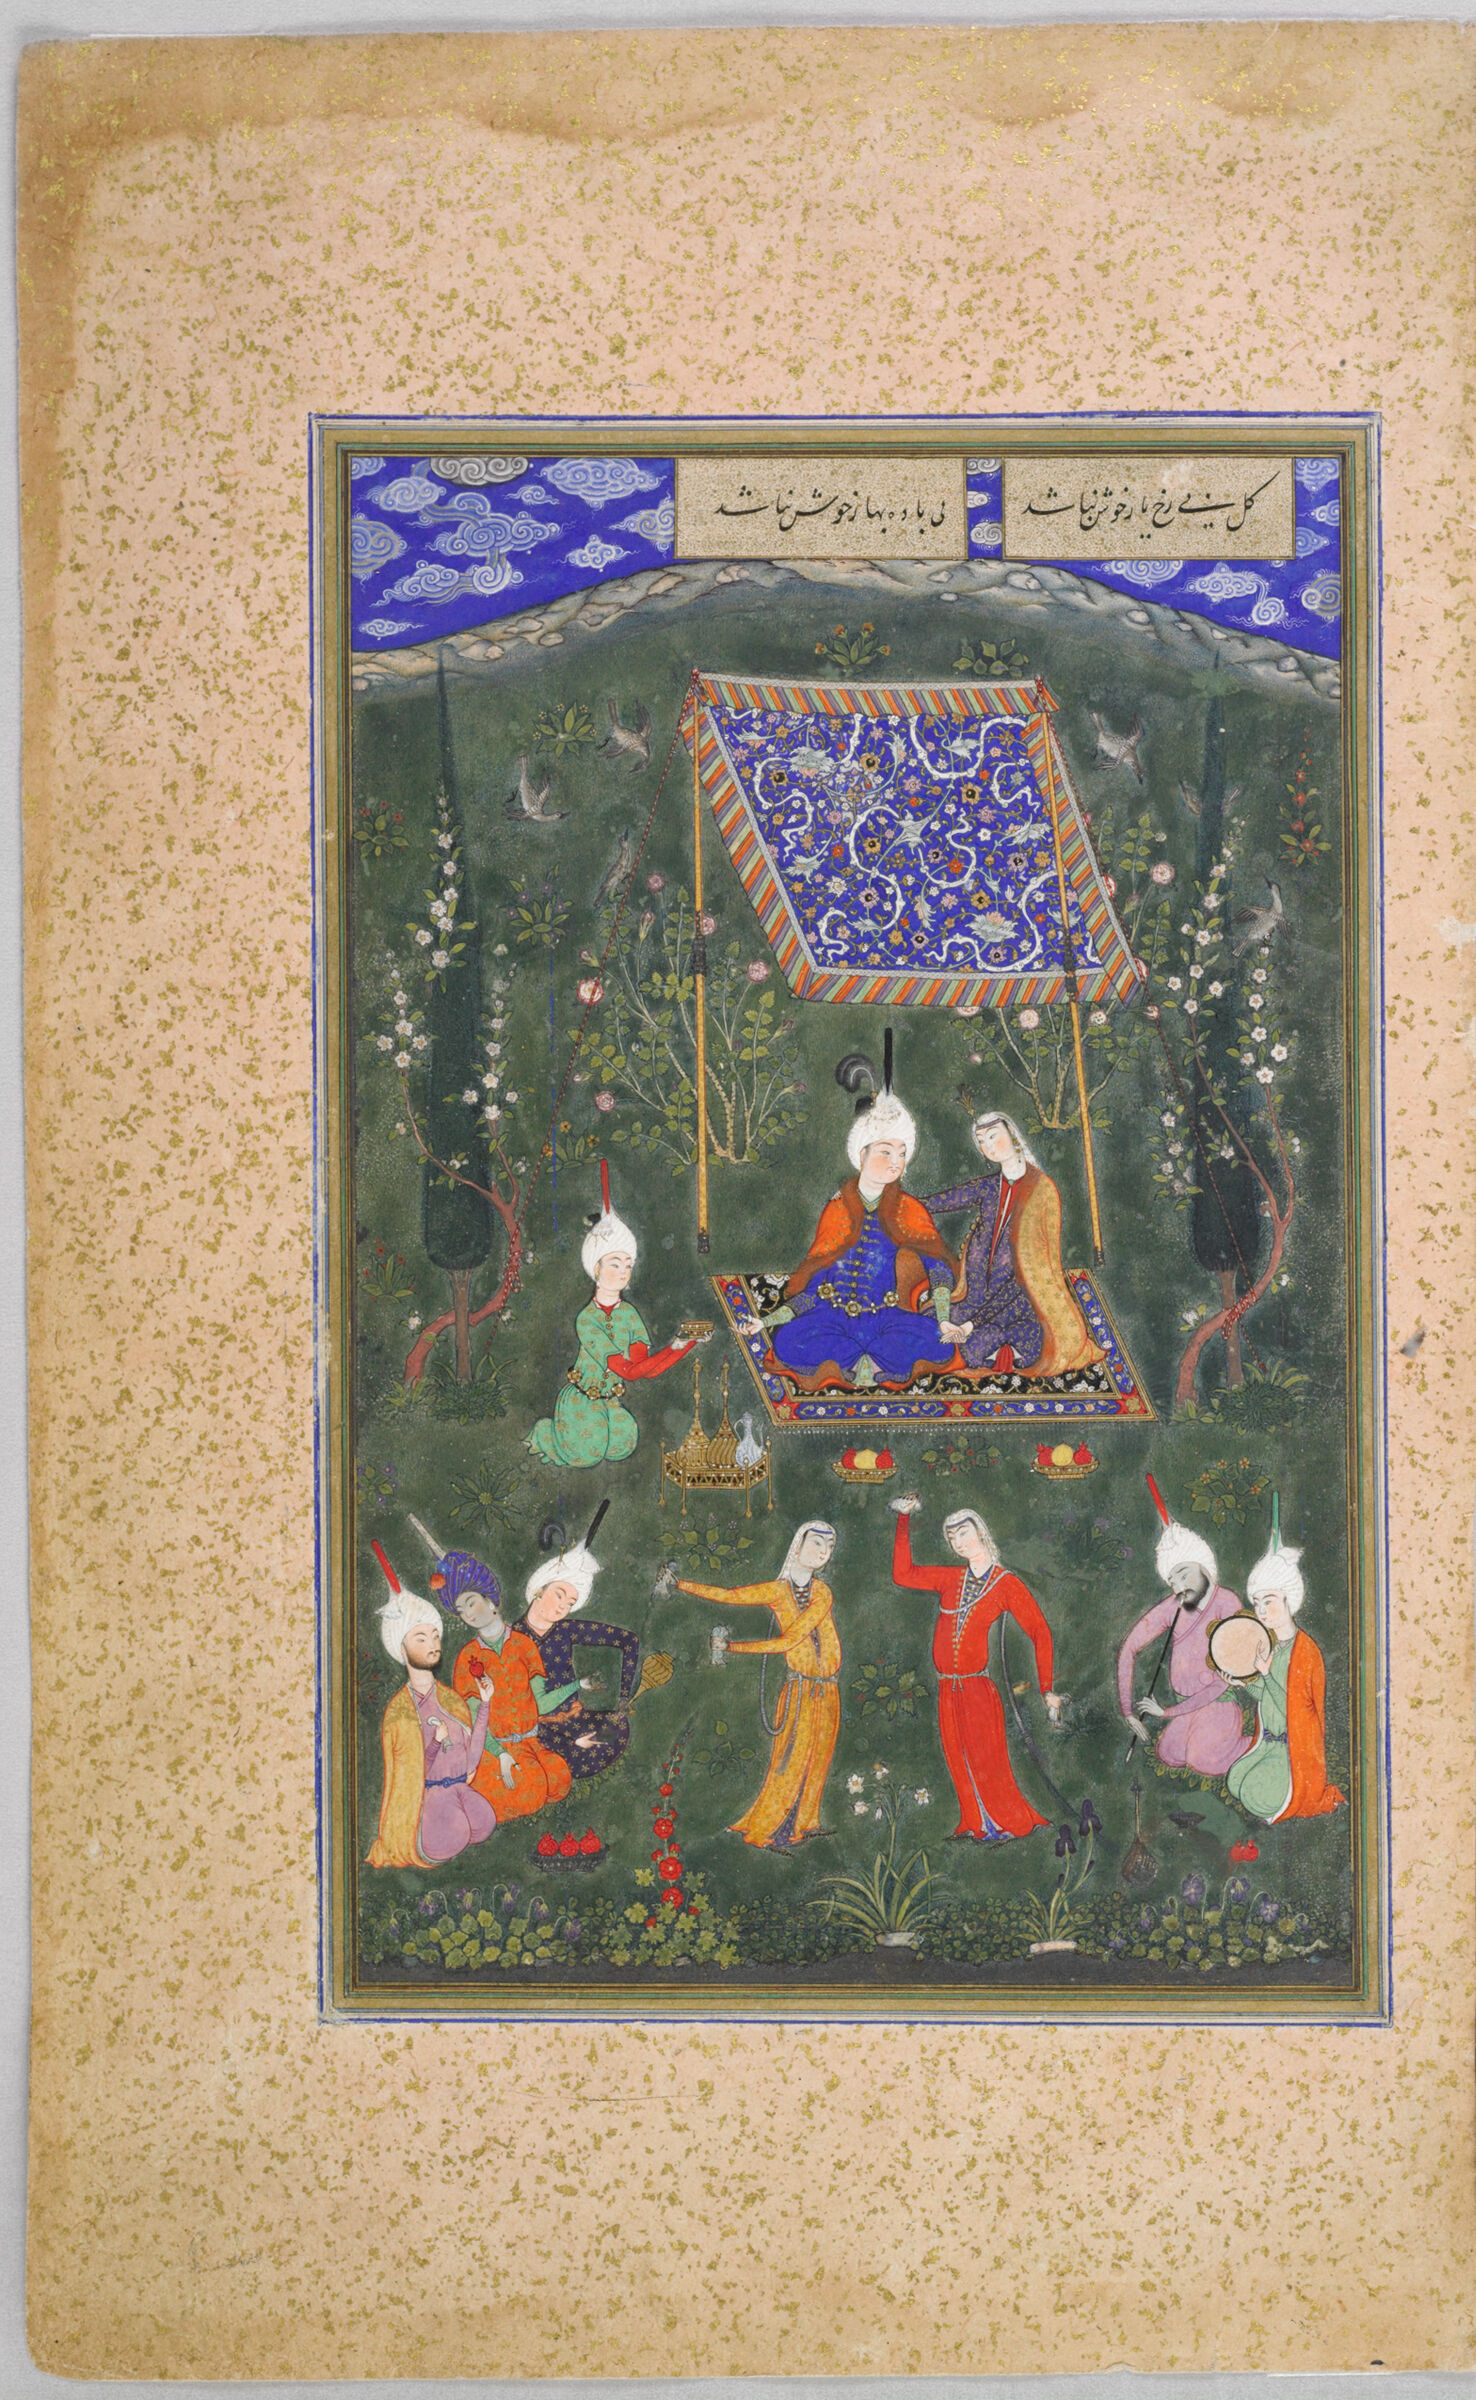 Lovers' Picnic, Painting (Recto), Text (Verso), Illustrated Folio From A Manuscript Of The Divan (Collected Works) Of Hafiz